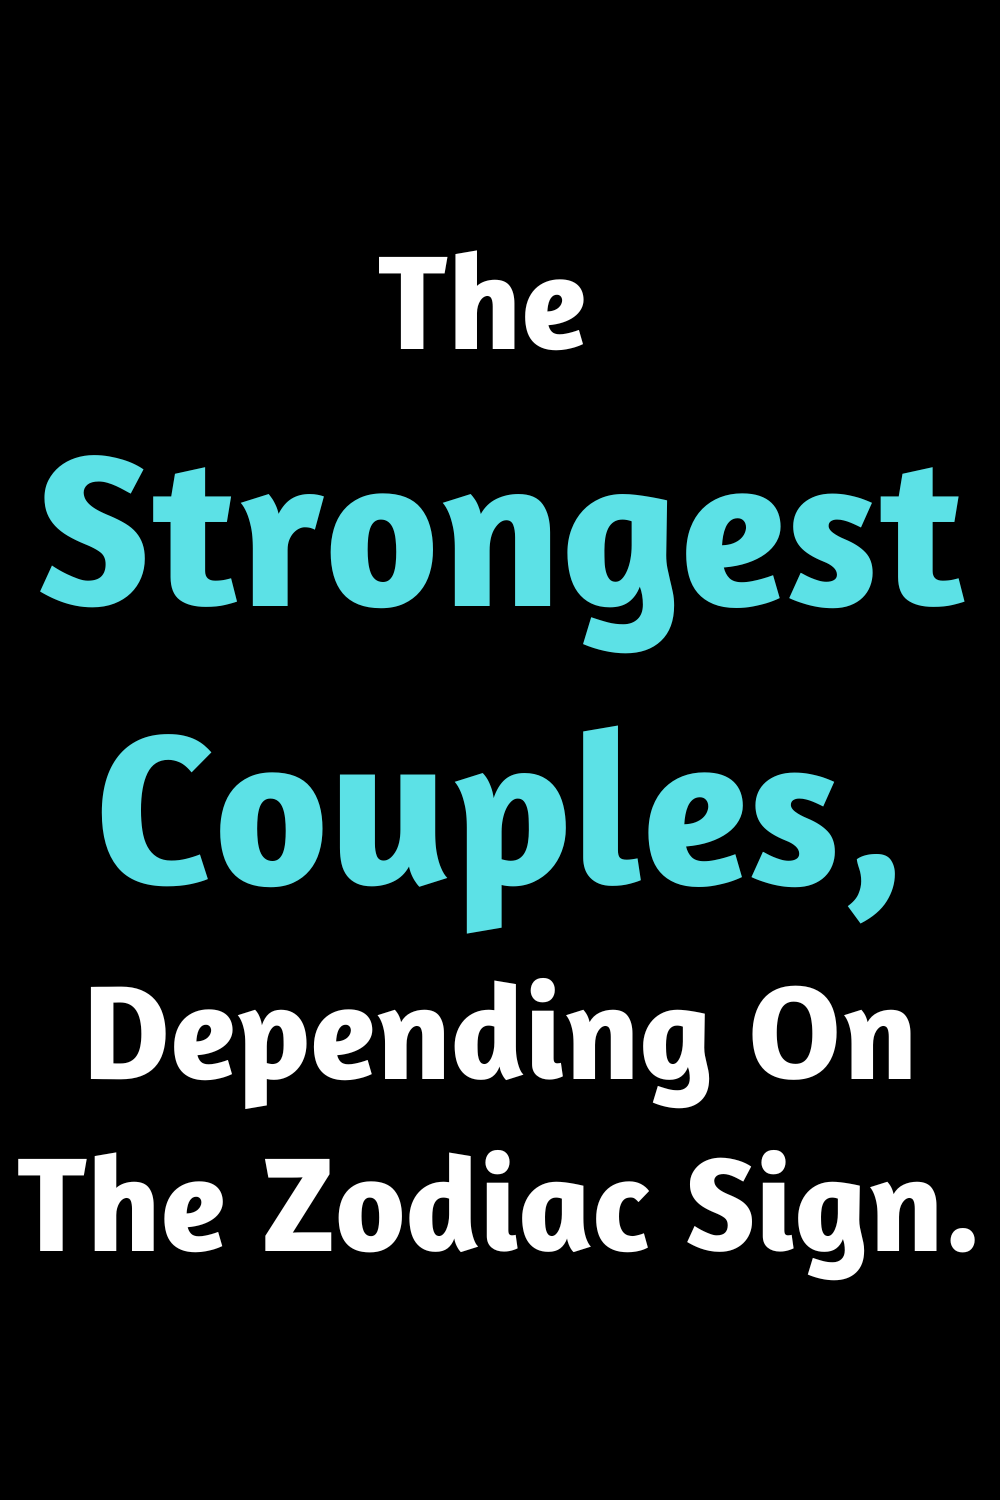 The Strongest Couples, Depending On The Zodiac Sign.